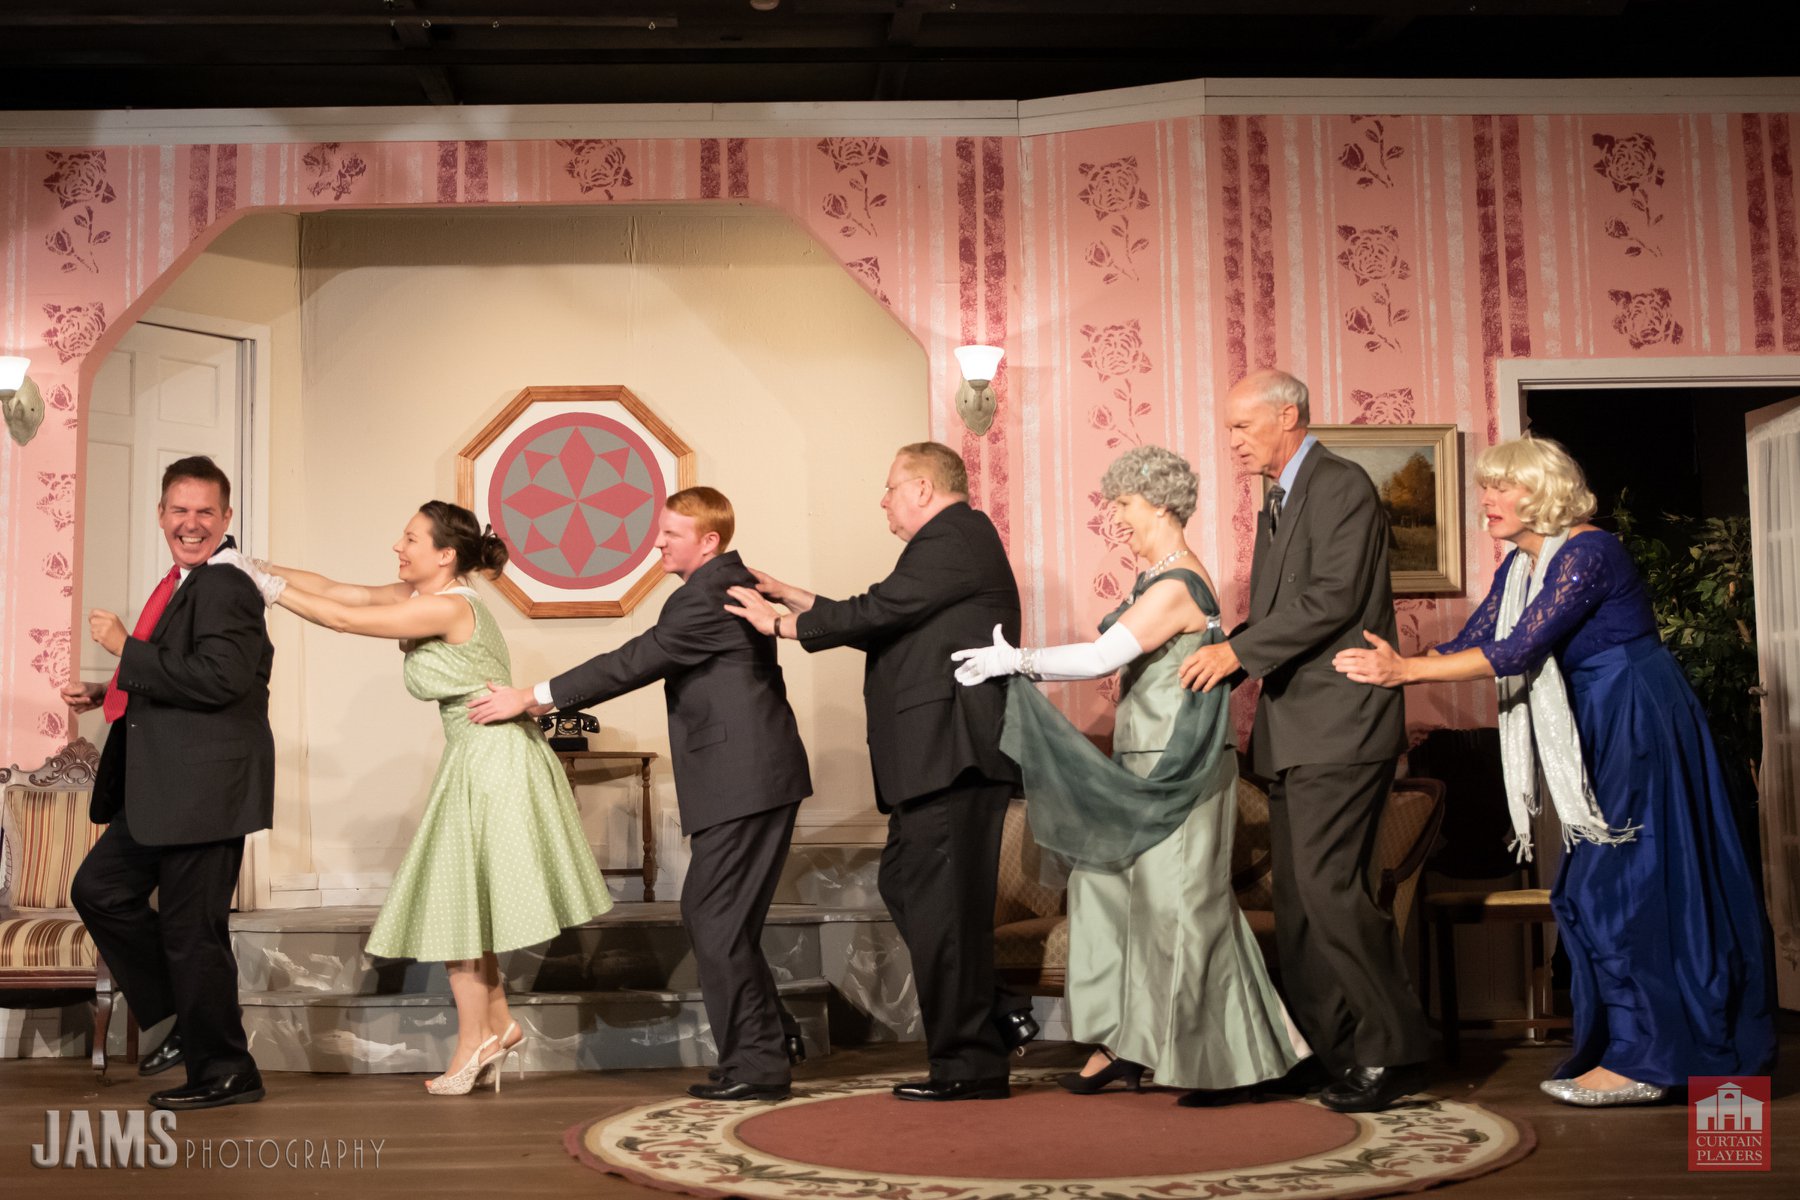 A scene from the Curtain Players production LEADING LADIES, on stage through September 22. (photo credit: Jerri Shafer)